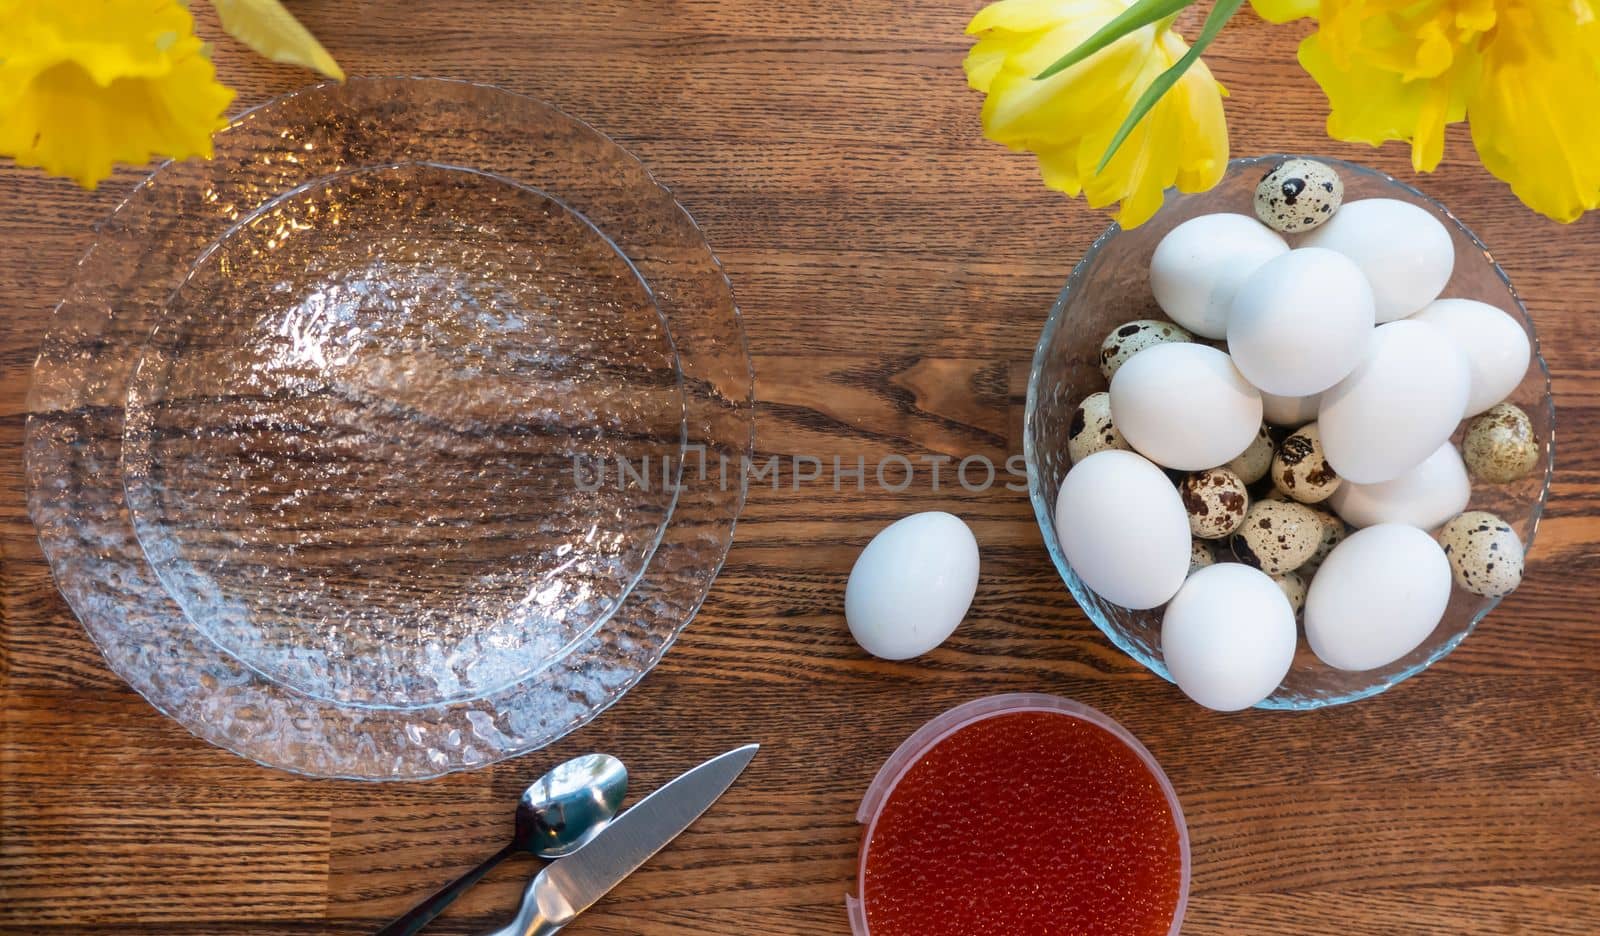 Top view of a bowl of boiled eggs and red caviar on wooden table, heathy breakfast meal by kajasja